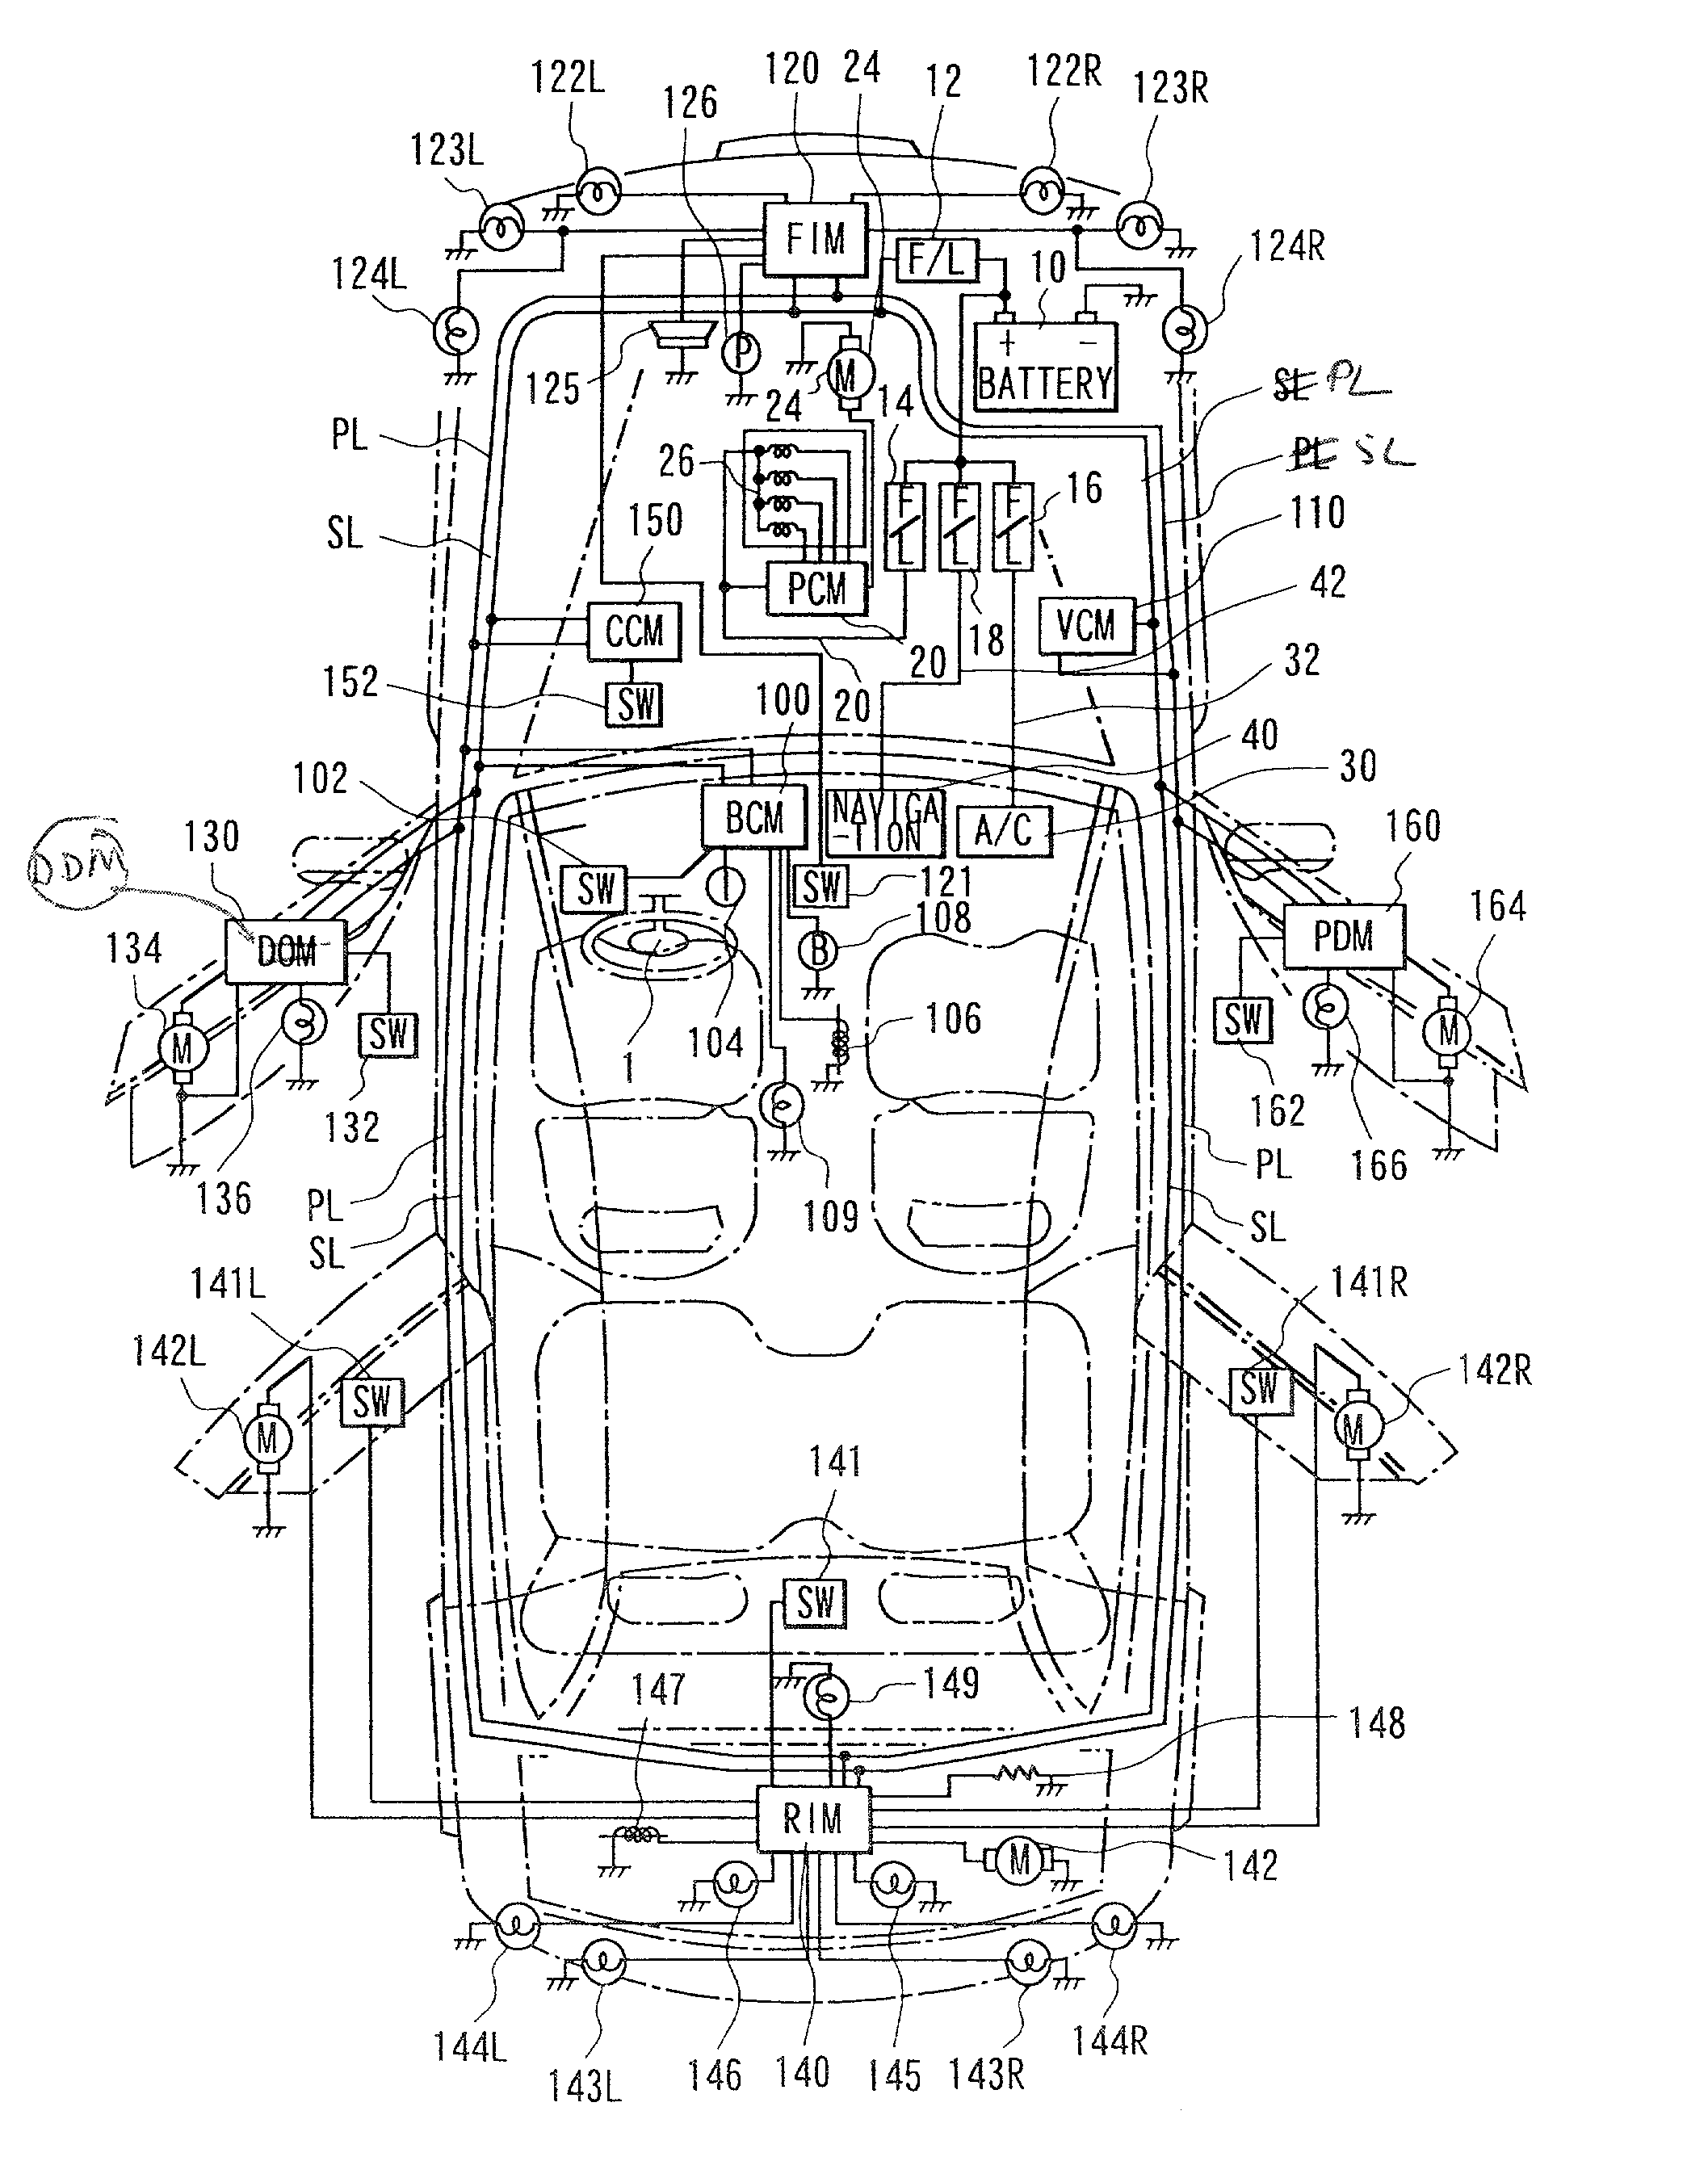 Electric power supply system for a vehicle